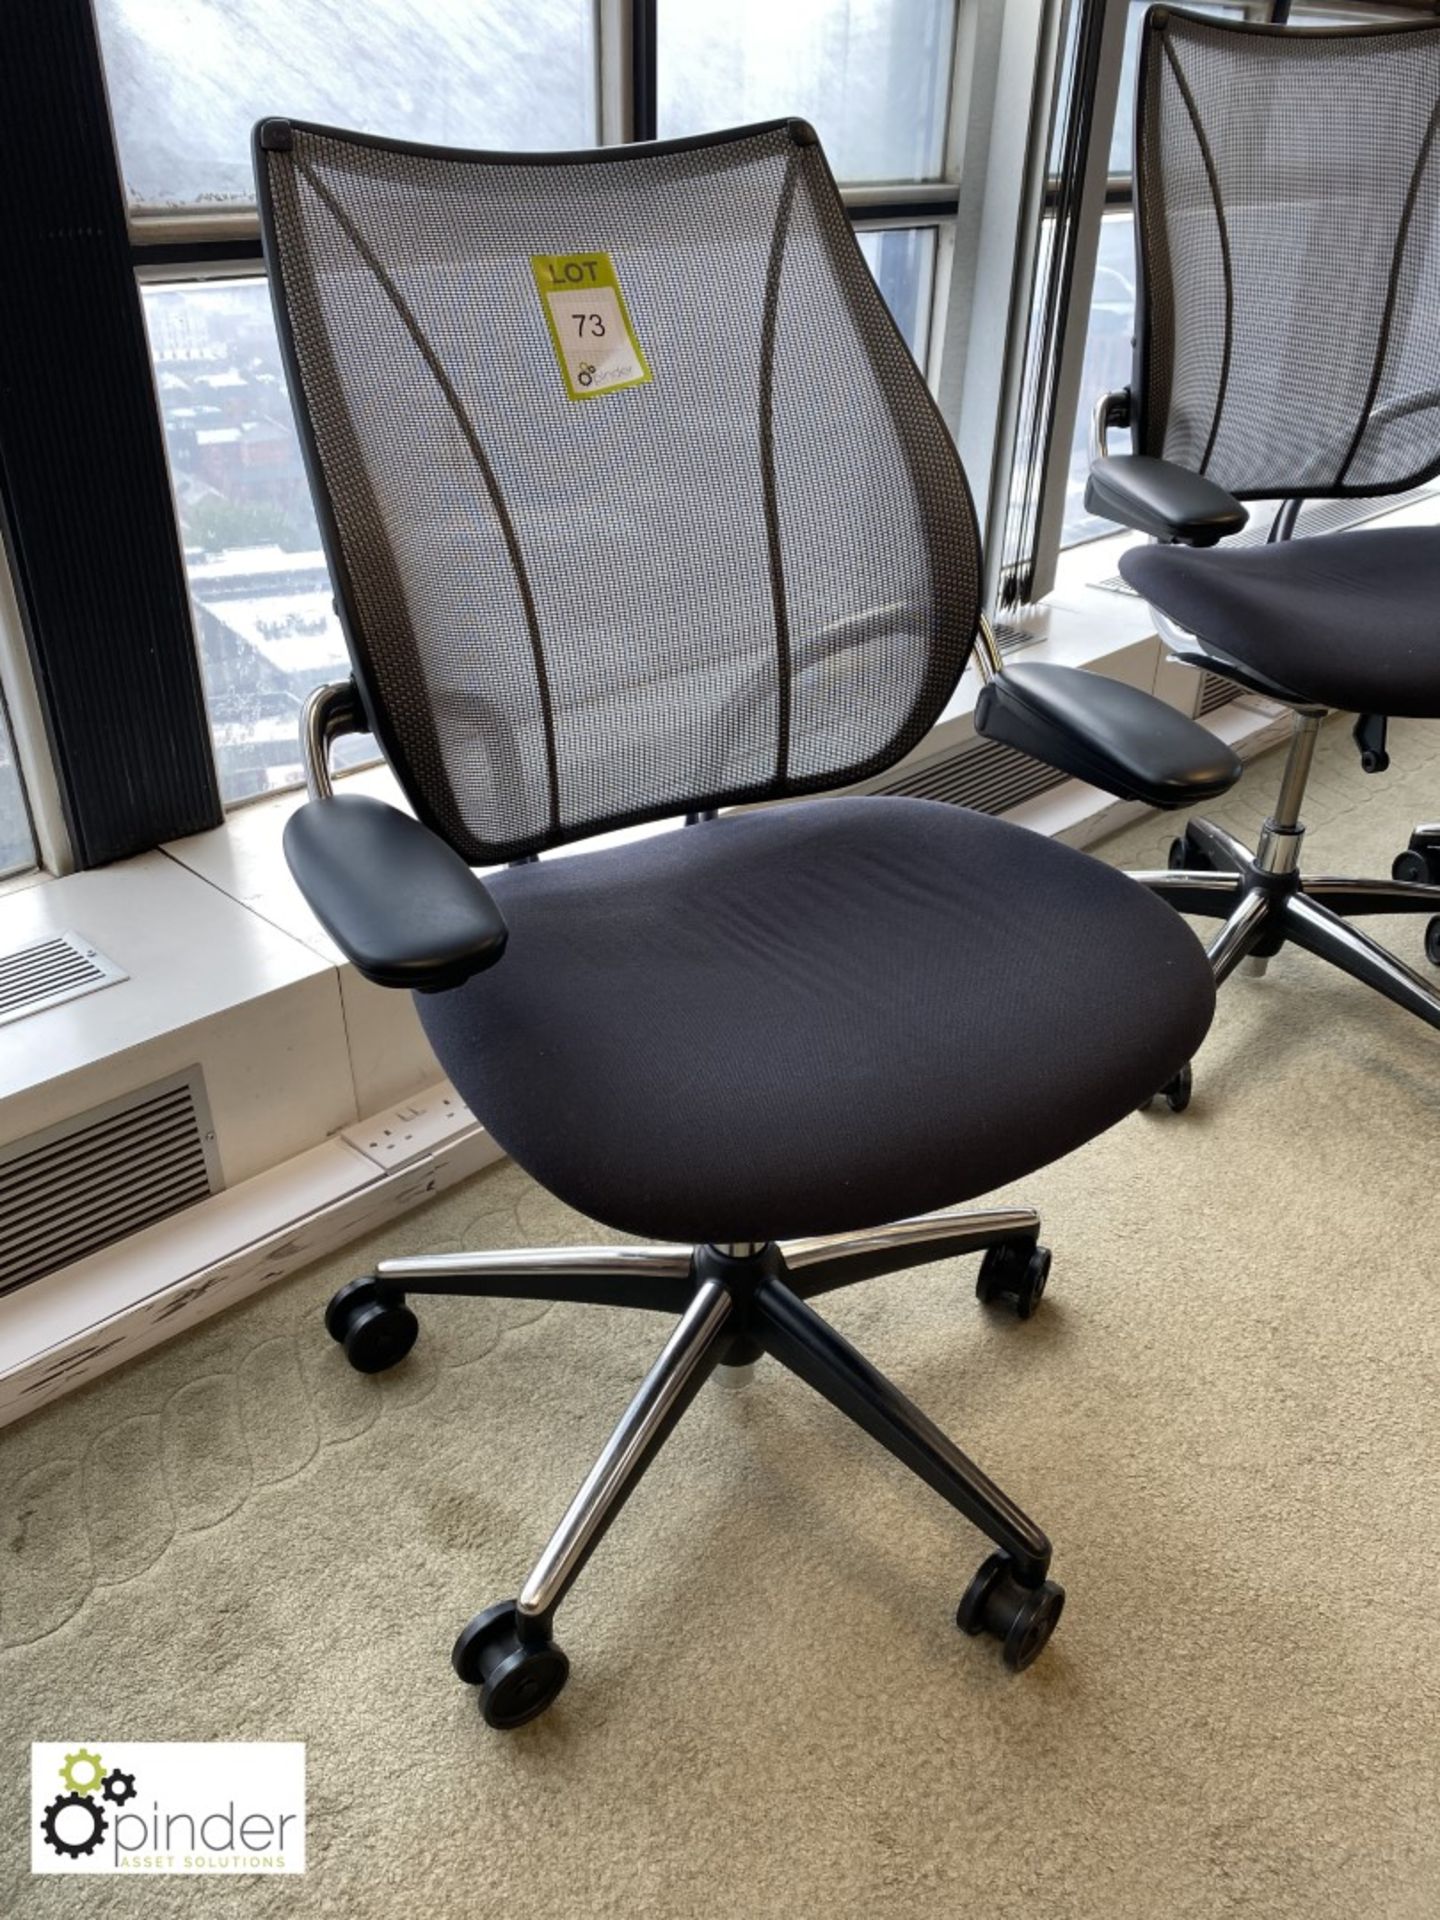 Upholstered/mesh back adjustable swivel office Armchair (located in Meeting Room 15 on 23rd Floor) - Image 2 of 2